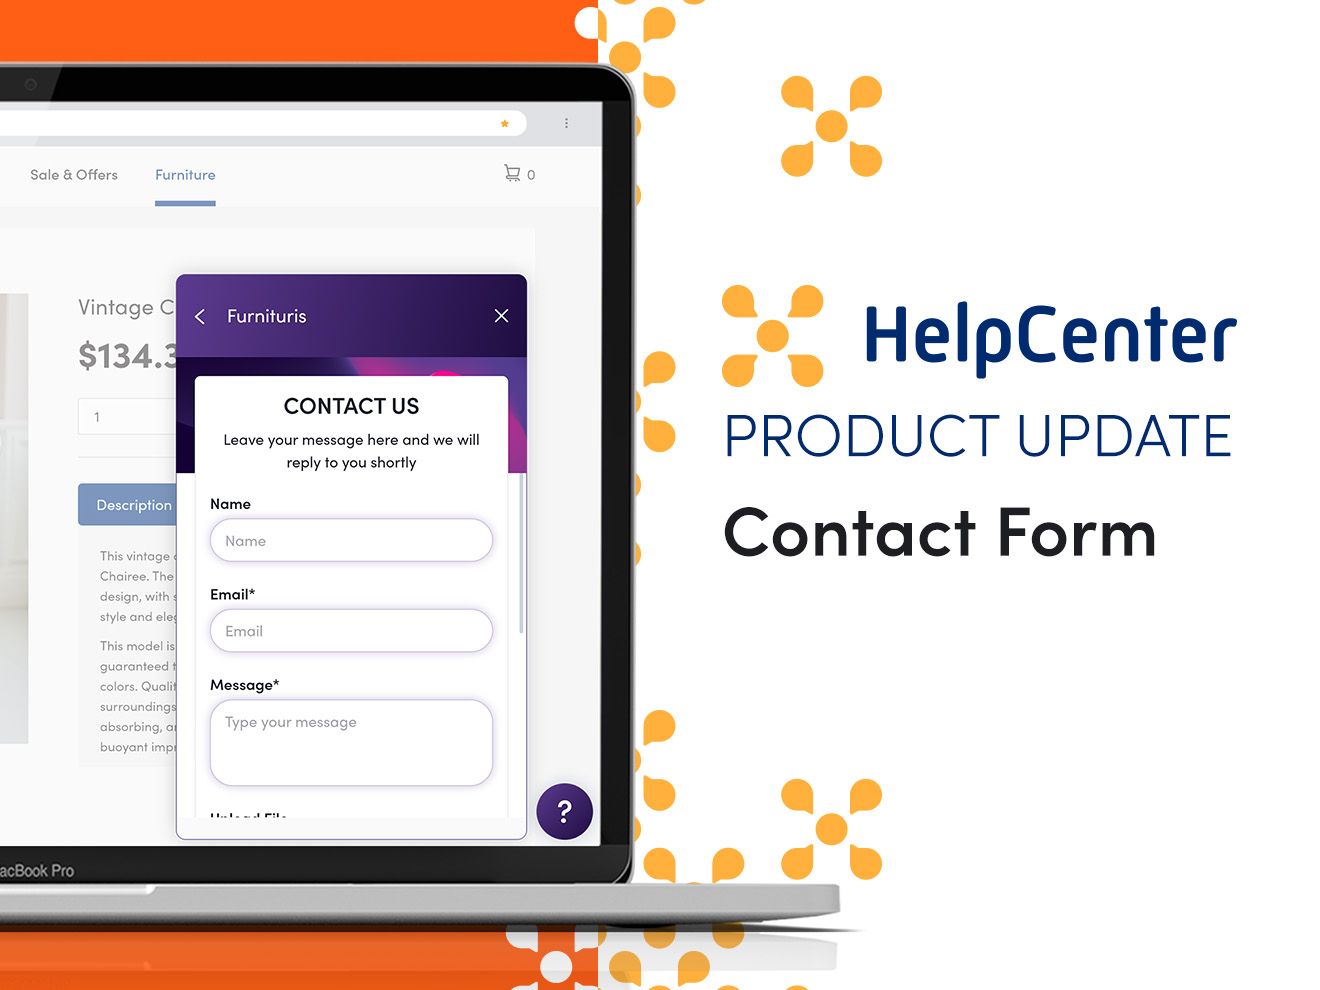 New: Add A Contact Form To Your Store To Easily Connect With Customers